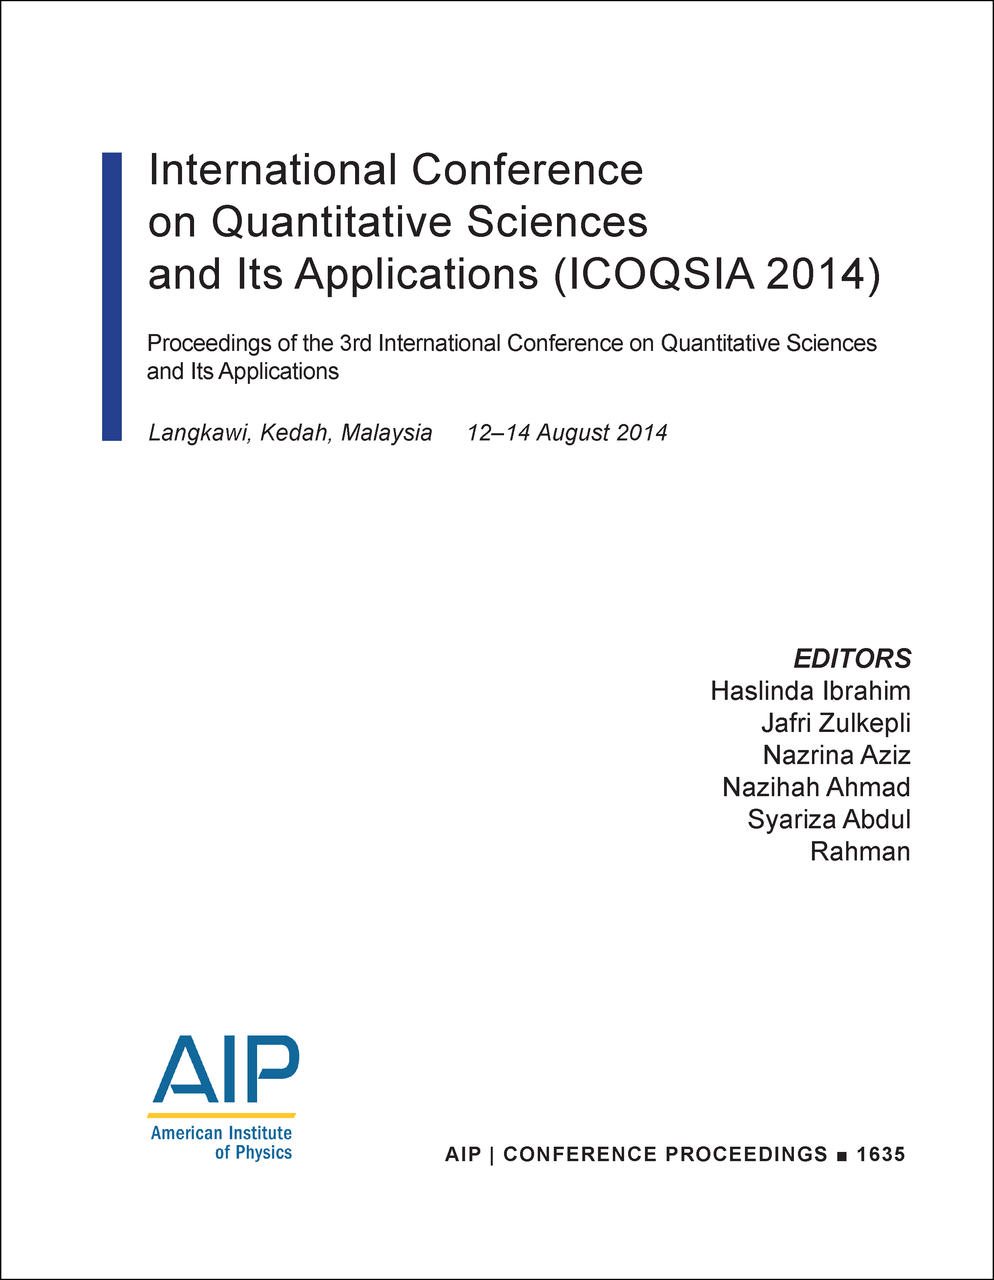 AIP Conference Proceedings of the 3rd International Conference on Quantitative Sciences and its Applications (ICOQSIA 2014)